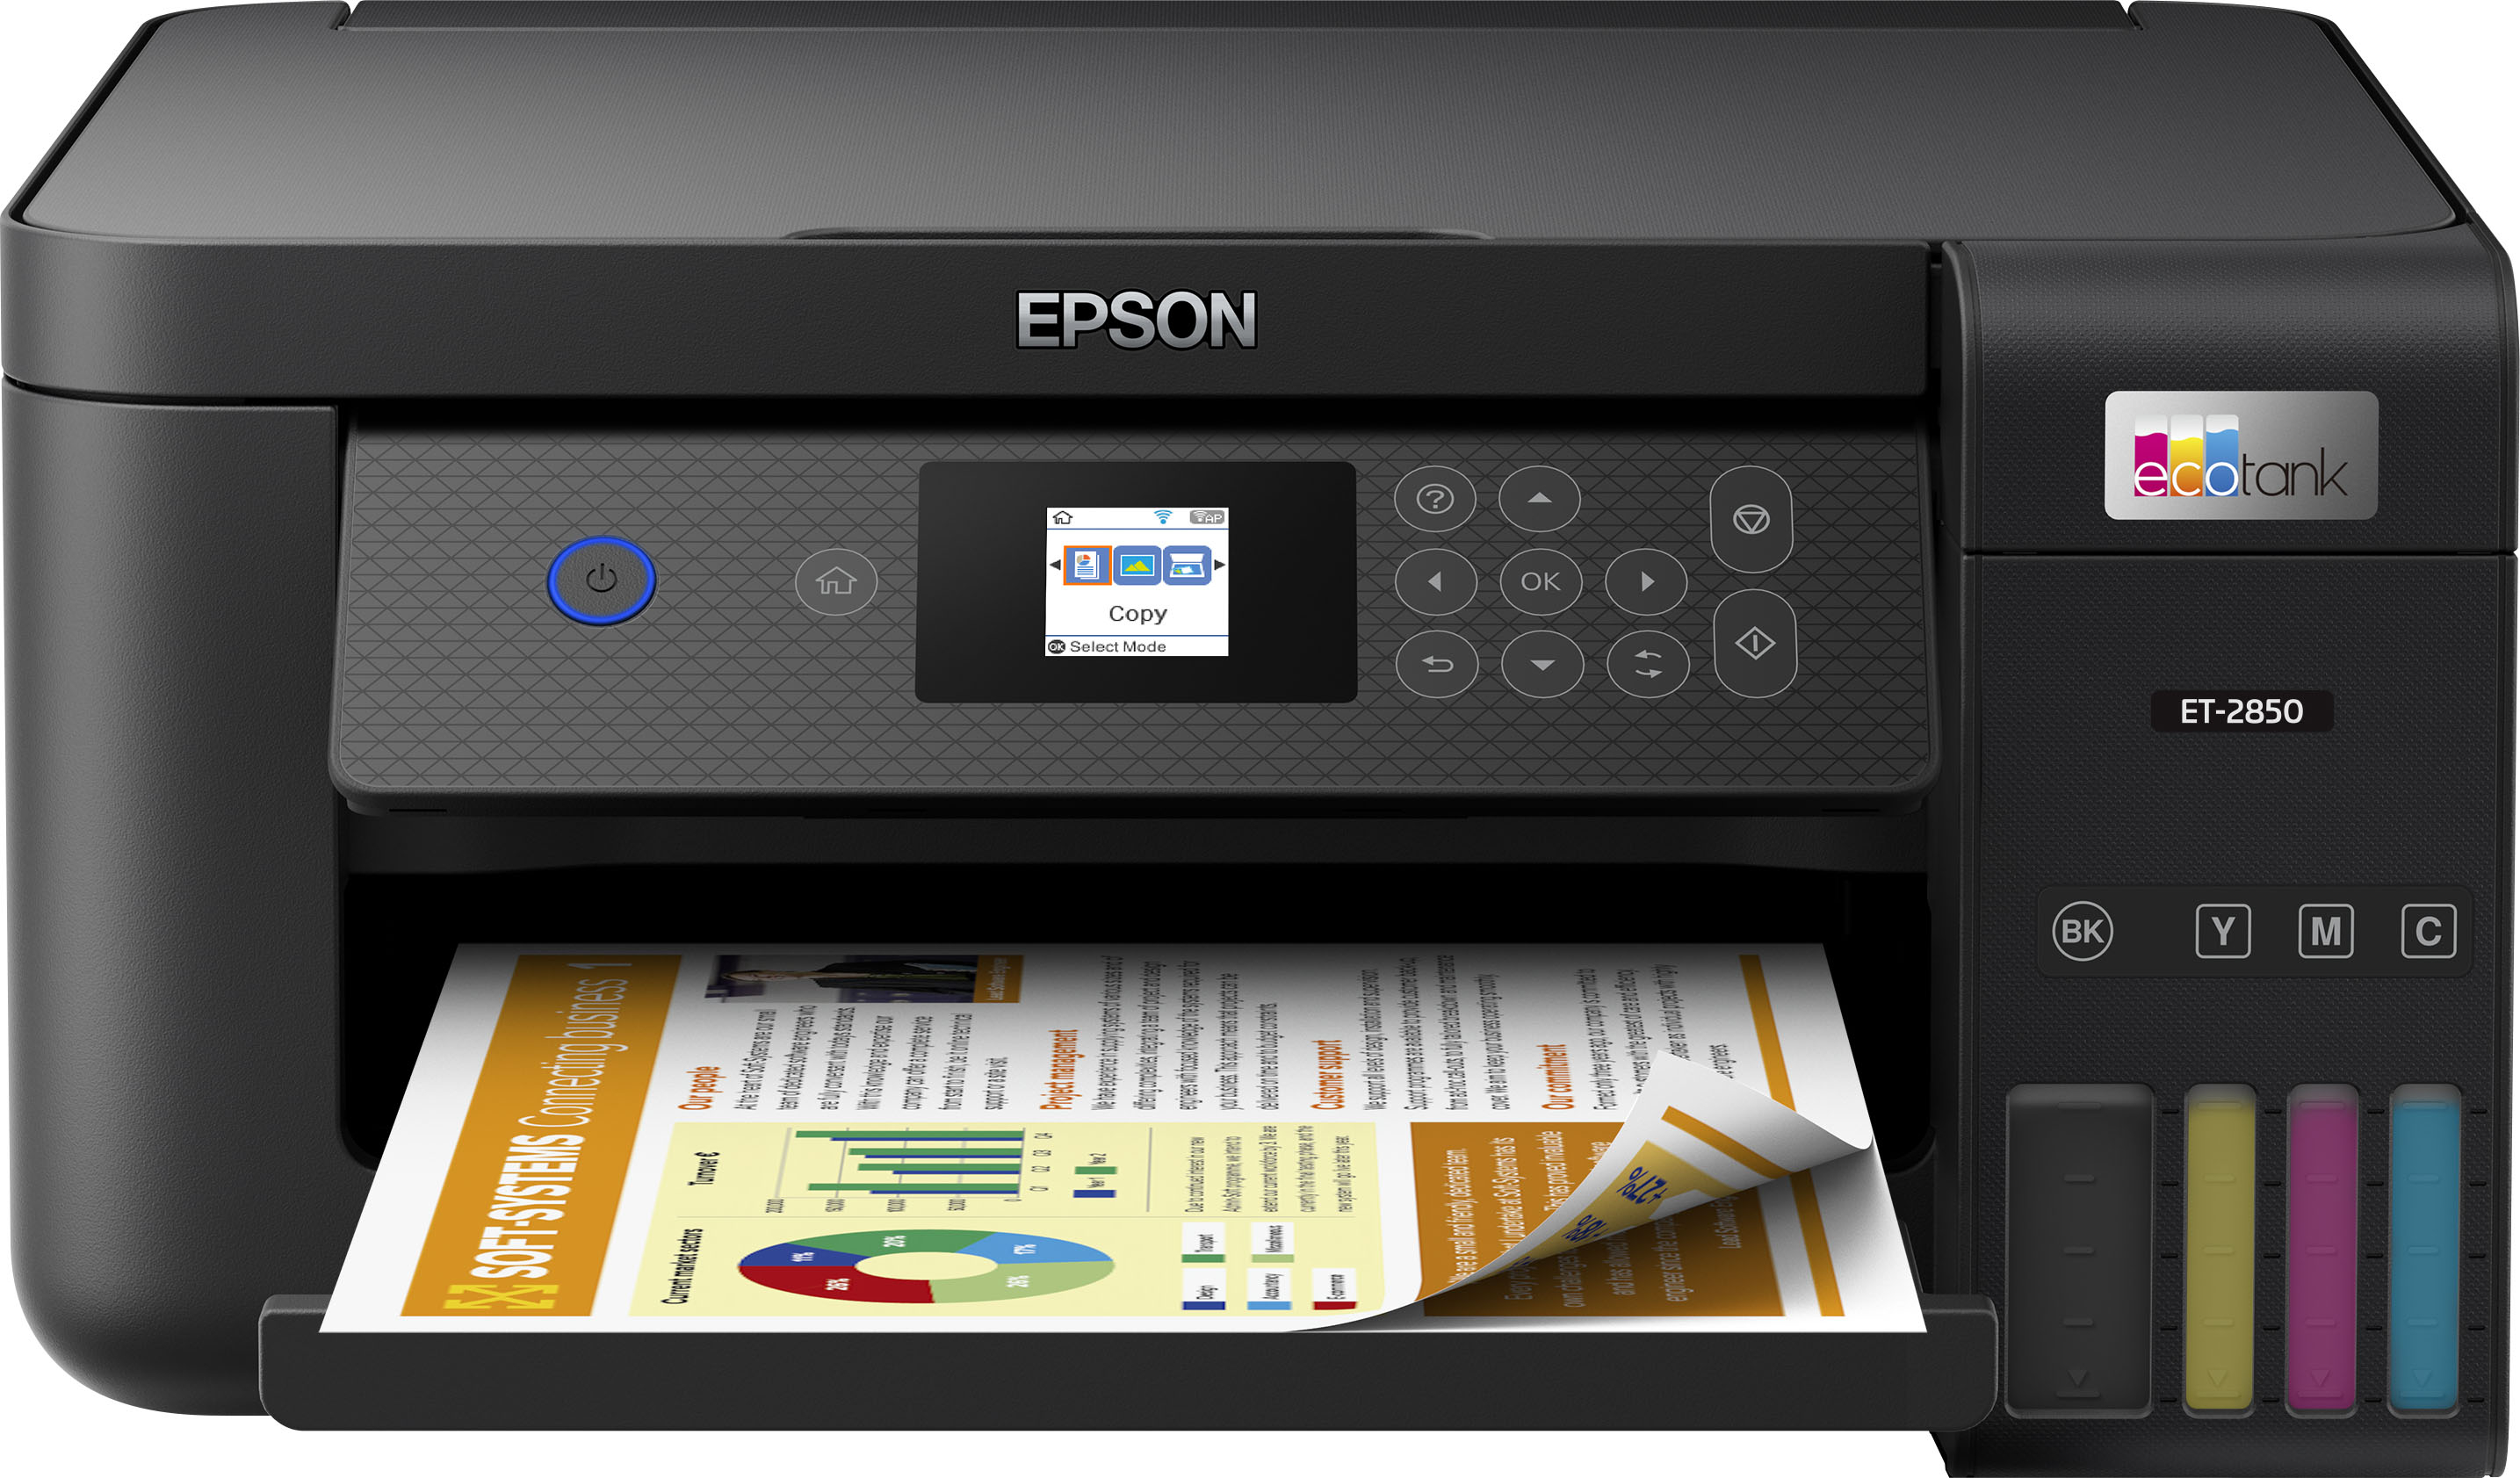  Epson EcoTank ET-2850 Wireless Color All-in-One Cartridge-Free  Supertank Printer with Scan, Copy and Auto 2-Sided Printing. Full 1-Year  Limited Warranty - White (Renewed Premium) : Office Products